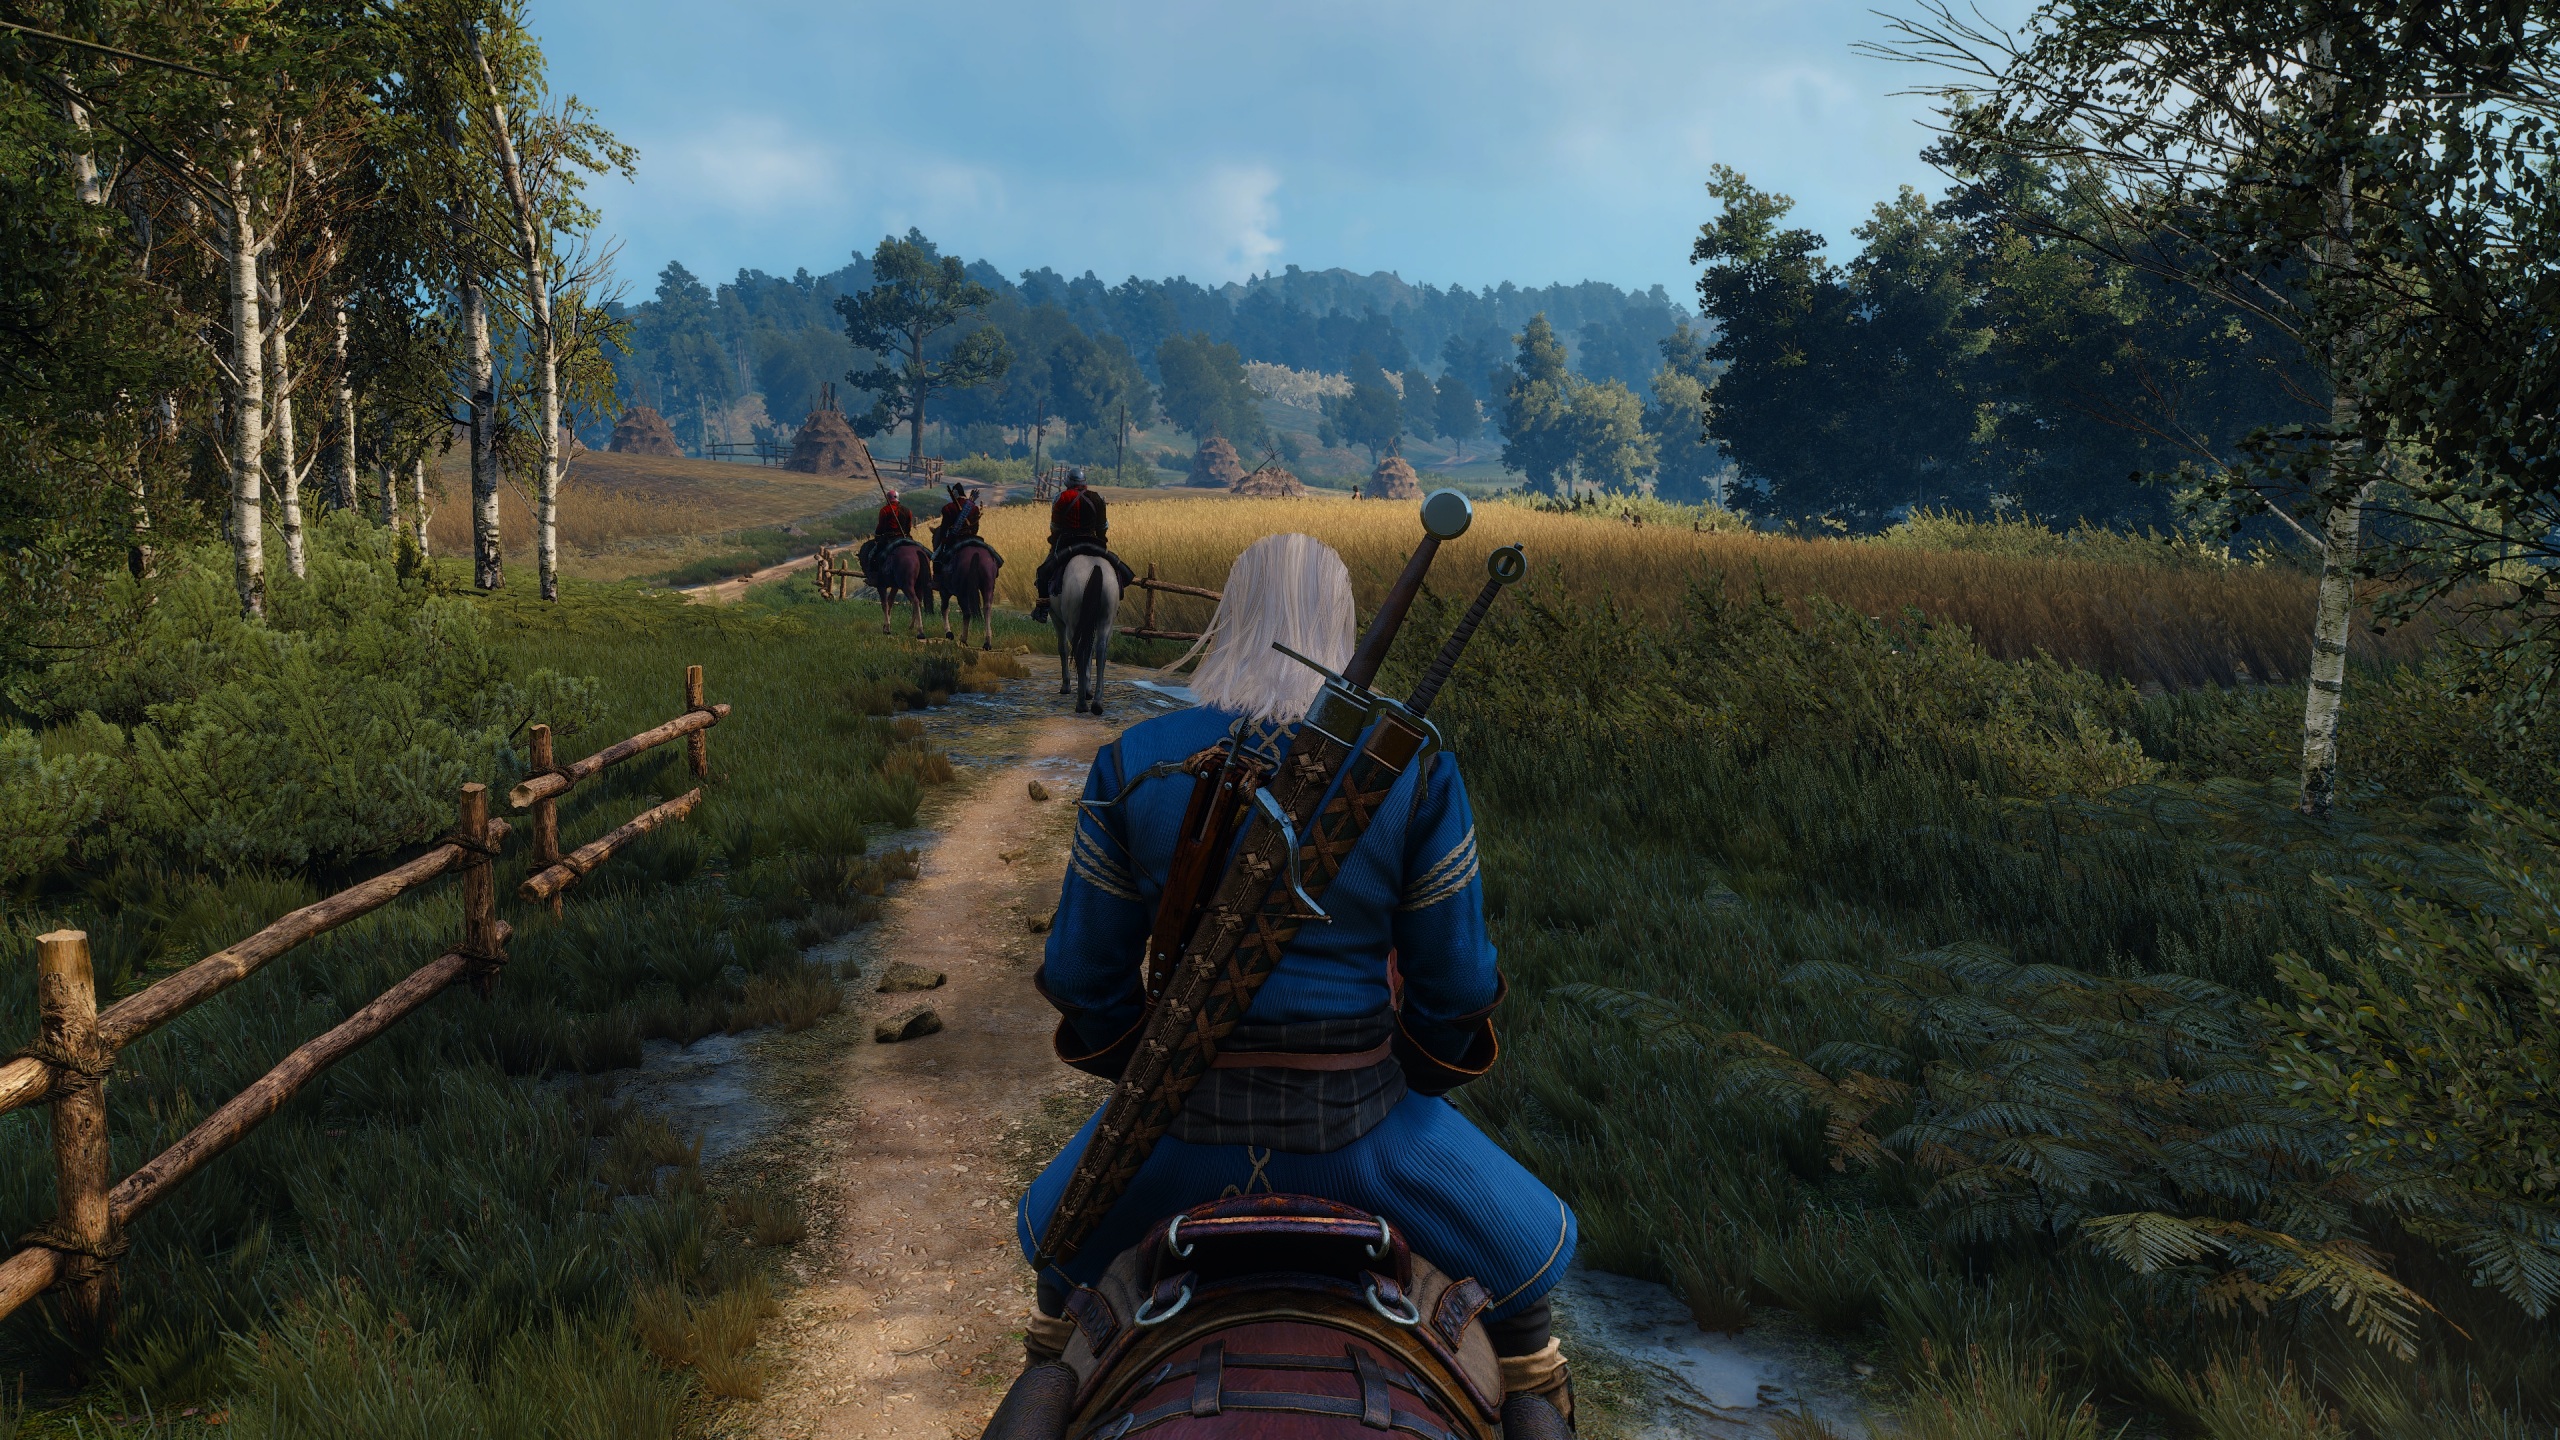 General 2560x1440 The Witcher 3: Wild Hunt CD Projekt RED RPG screen shot video games Geralt of Rivia video game characters Book characters